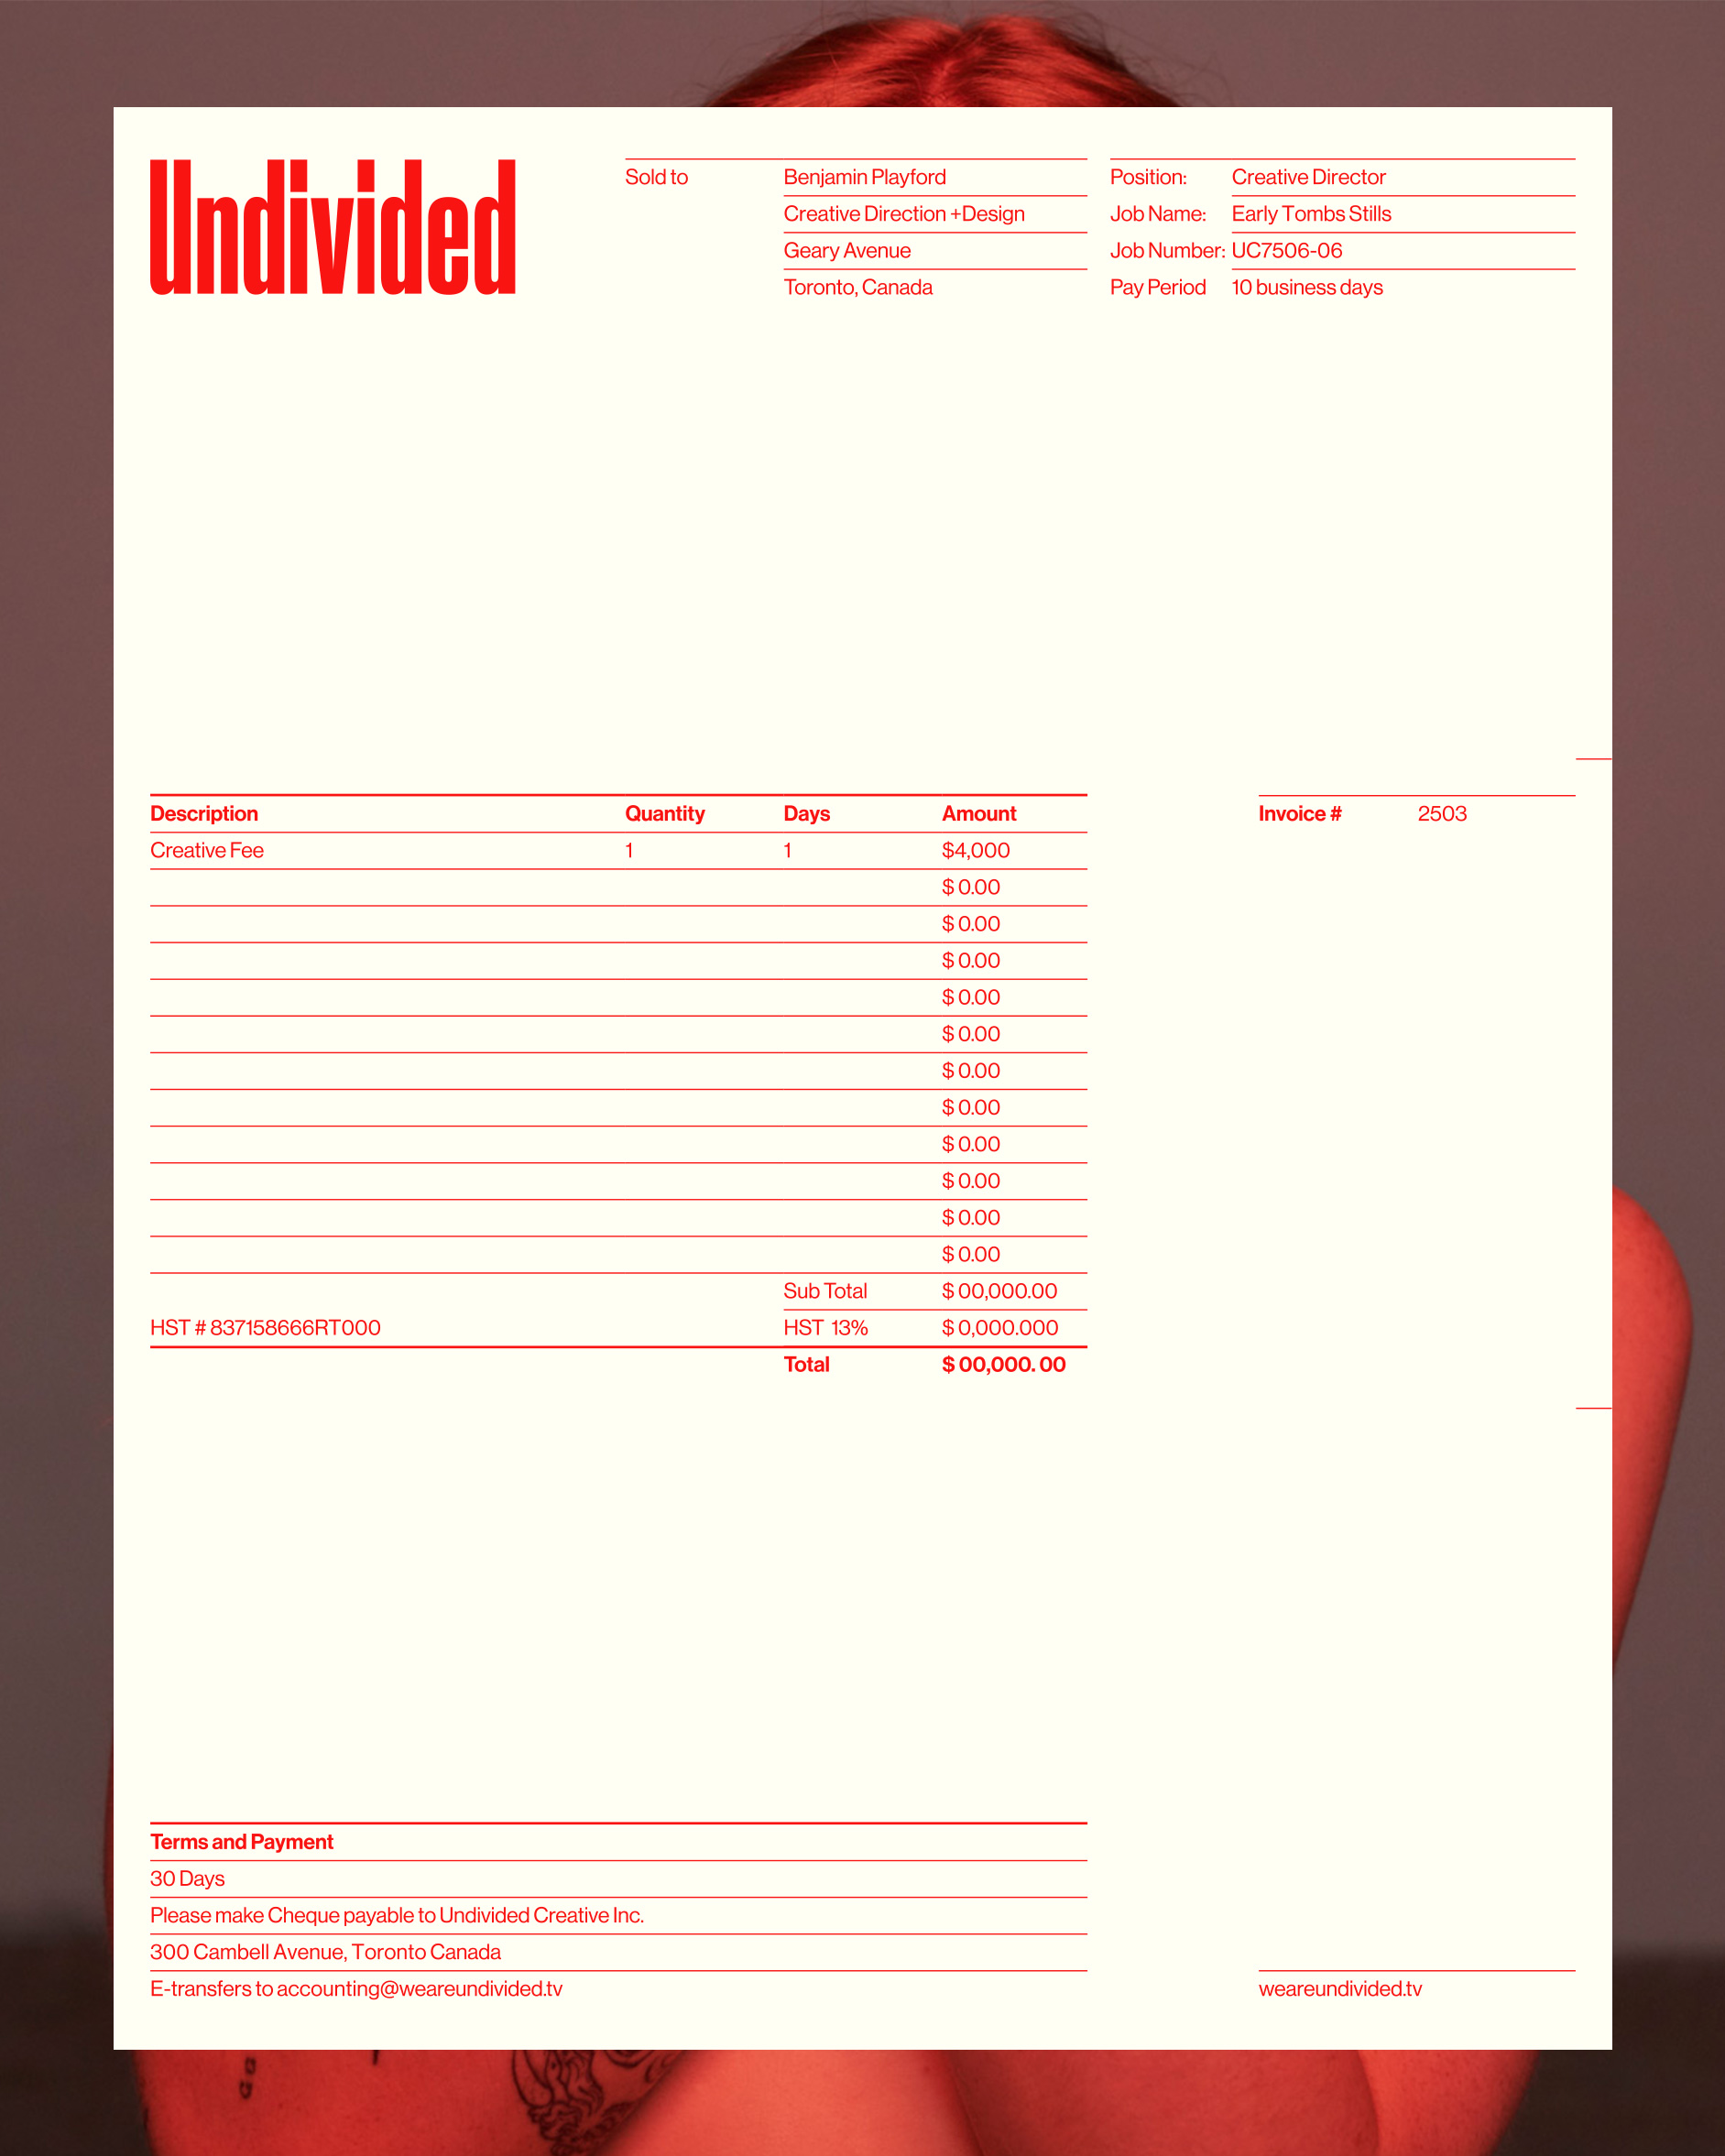 29_EXCEL-INVOICE-TEMPLATE-for-UNDIVIDED.-DESIGNED-with-BEN-PLAYFORD-2020